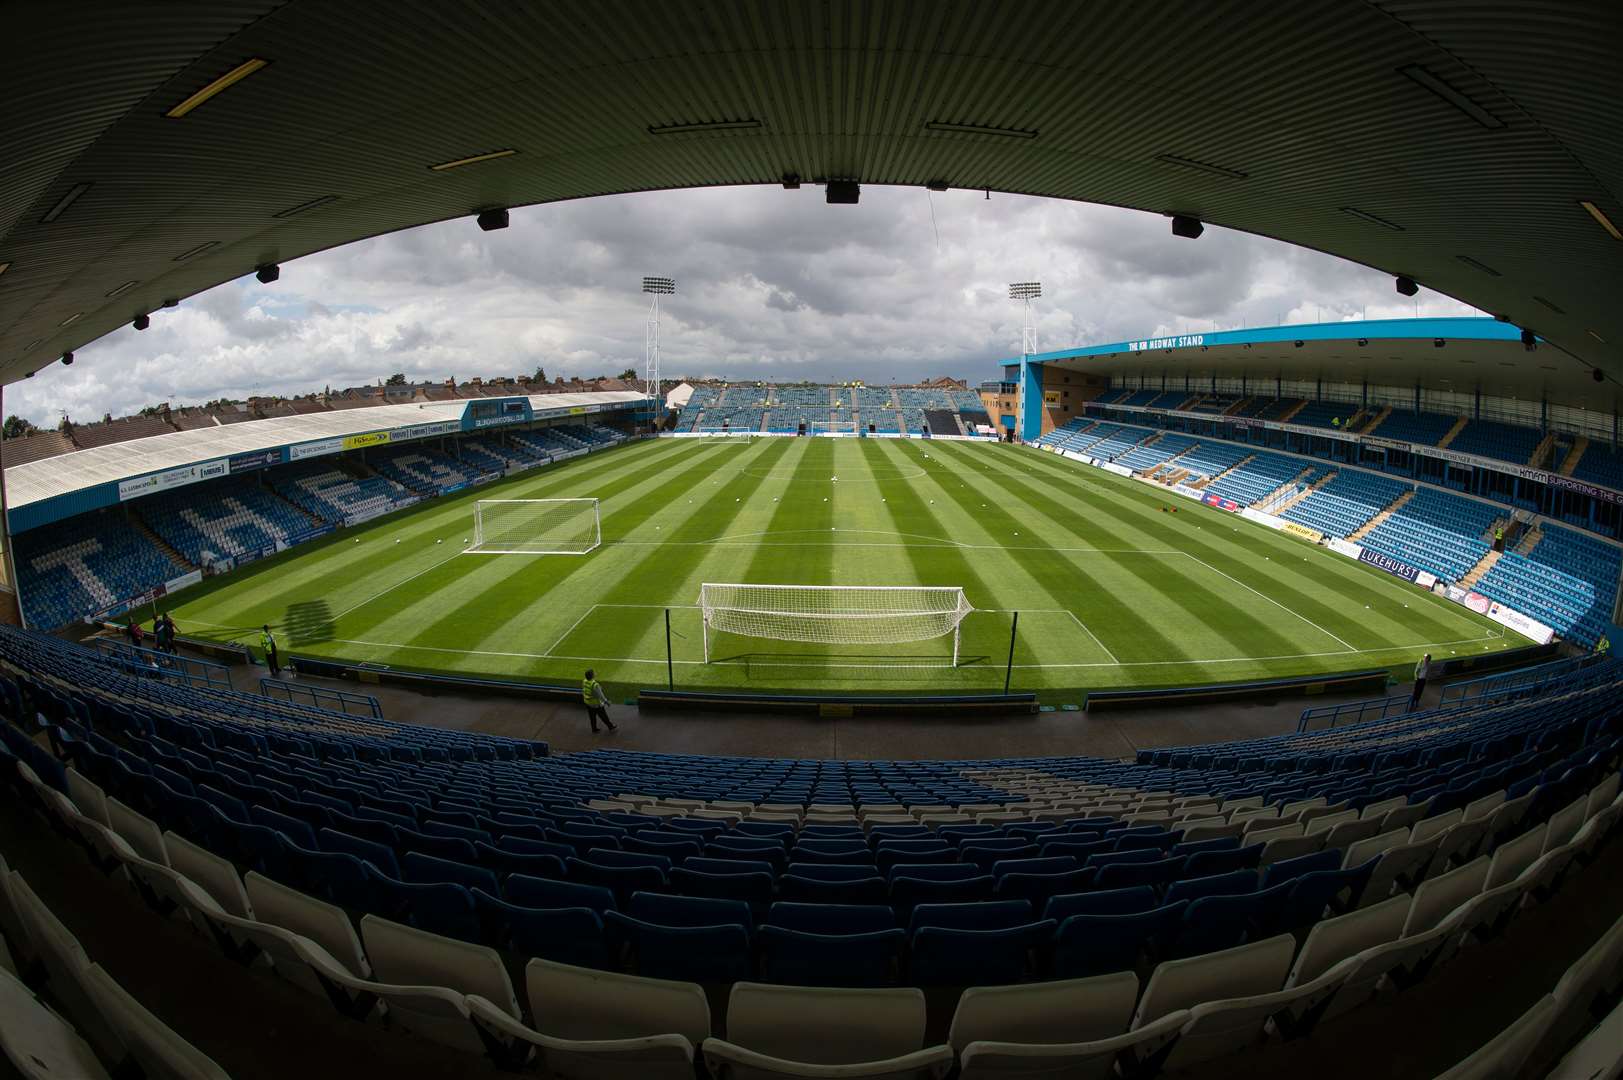 Gillingham are aware of an alleged racist comment during their game with Colchester United